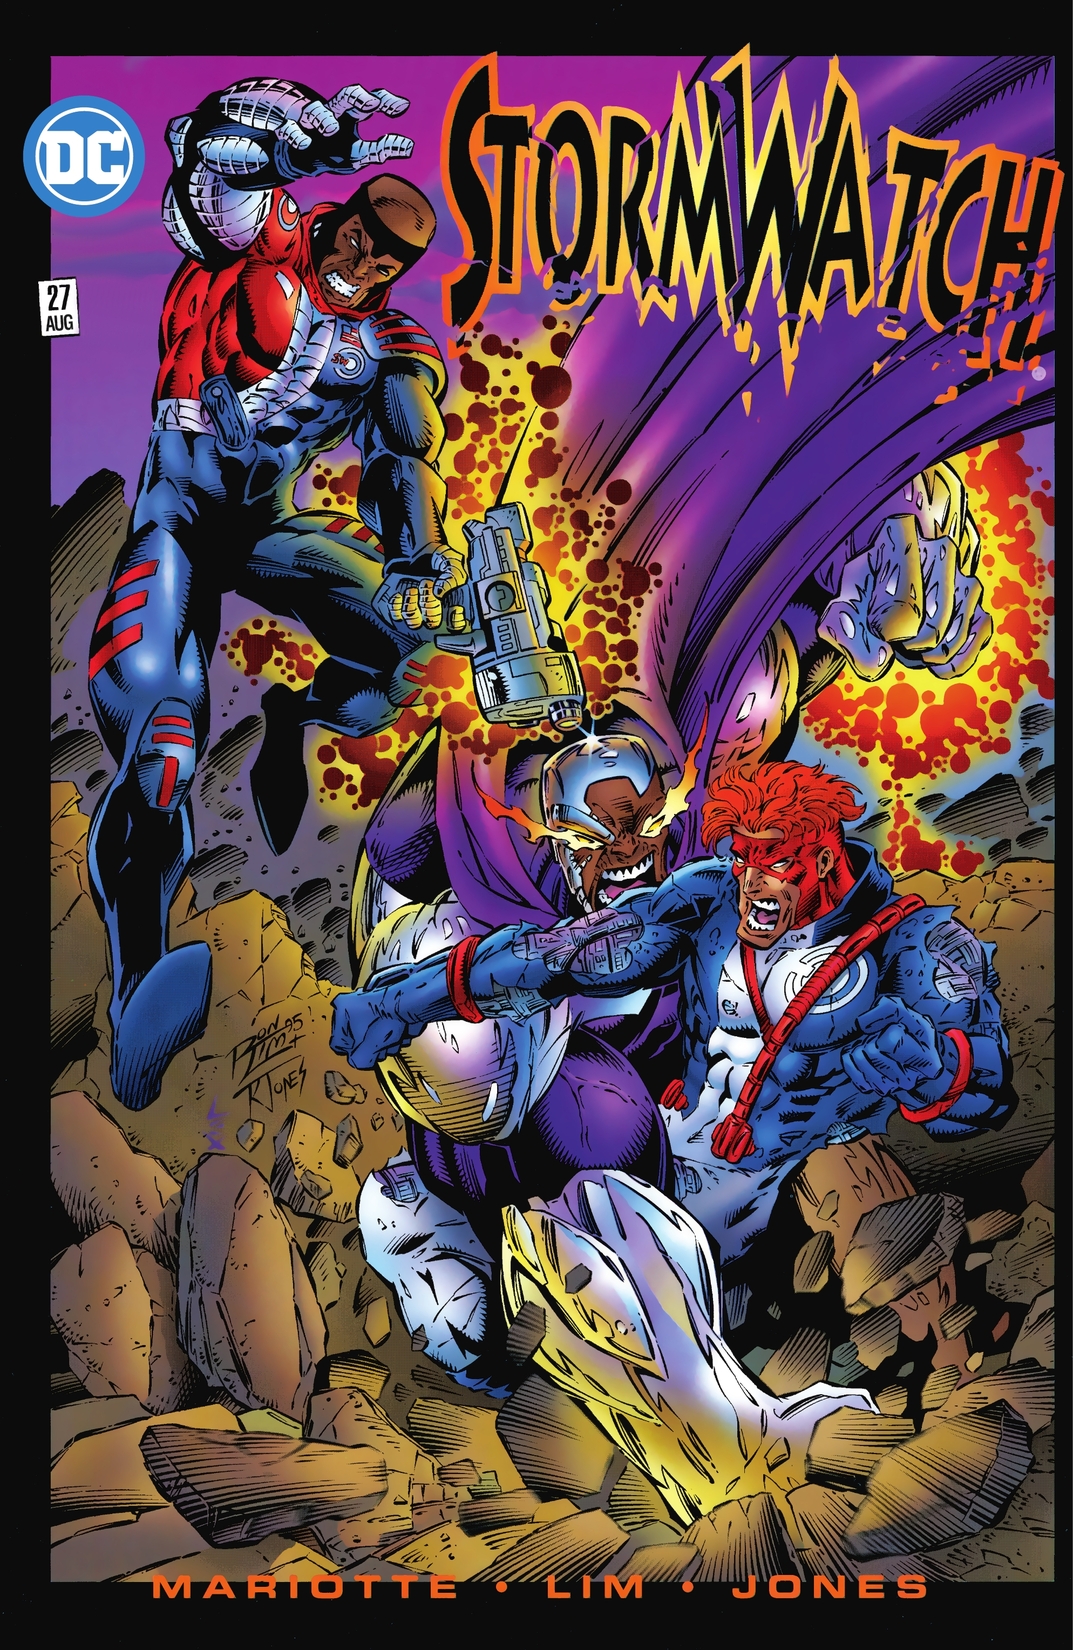 Stormwatch (1993-1997) #27 preview images